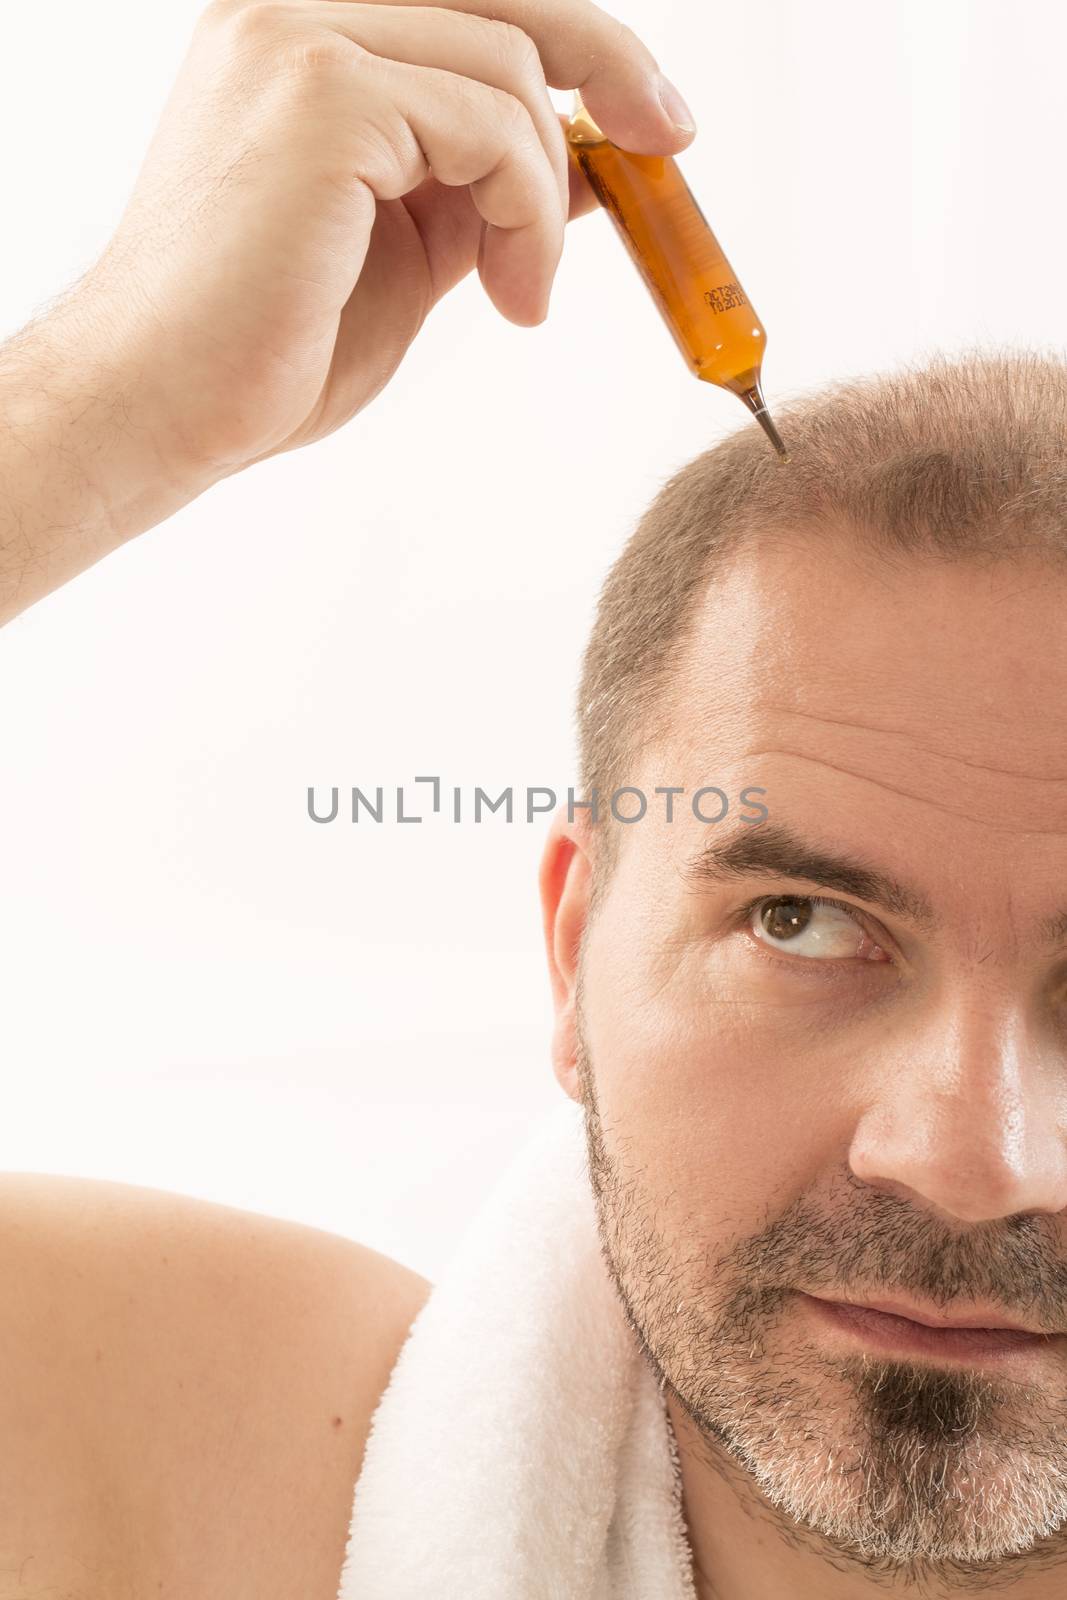 40s man with an incipient baldness , treatment, close-up, white background